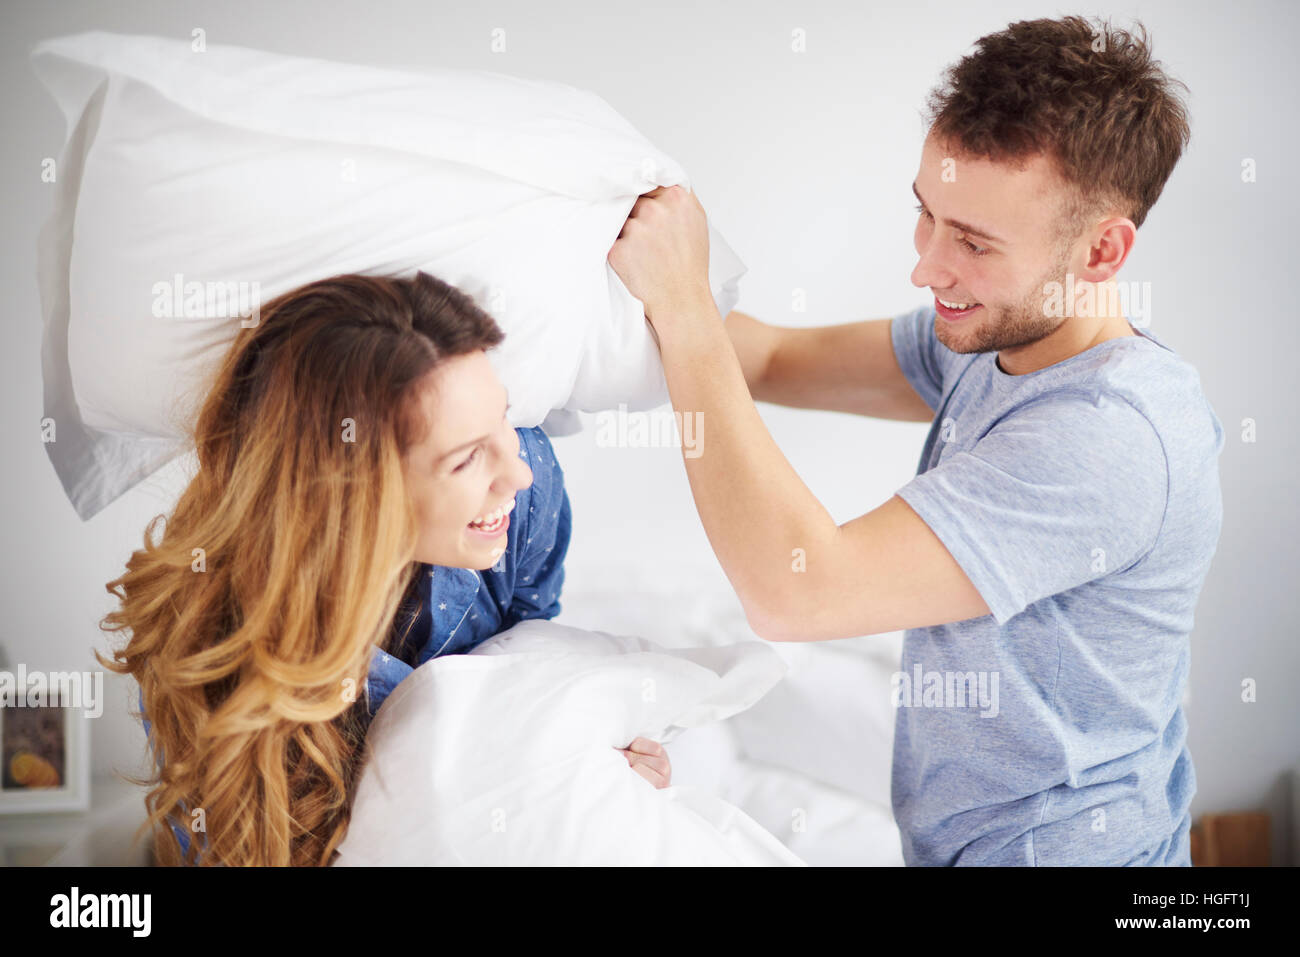 Couple having pillow fight in bedroom Stock Photo